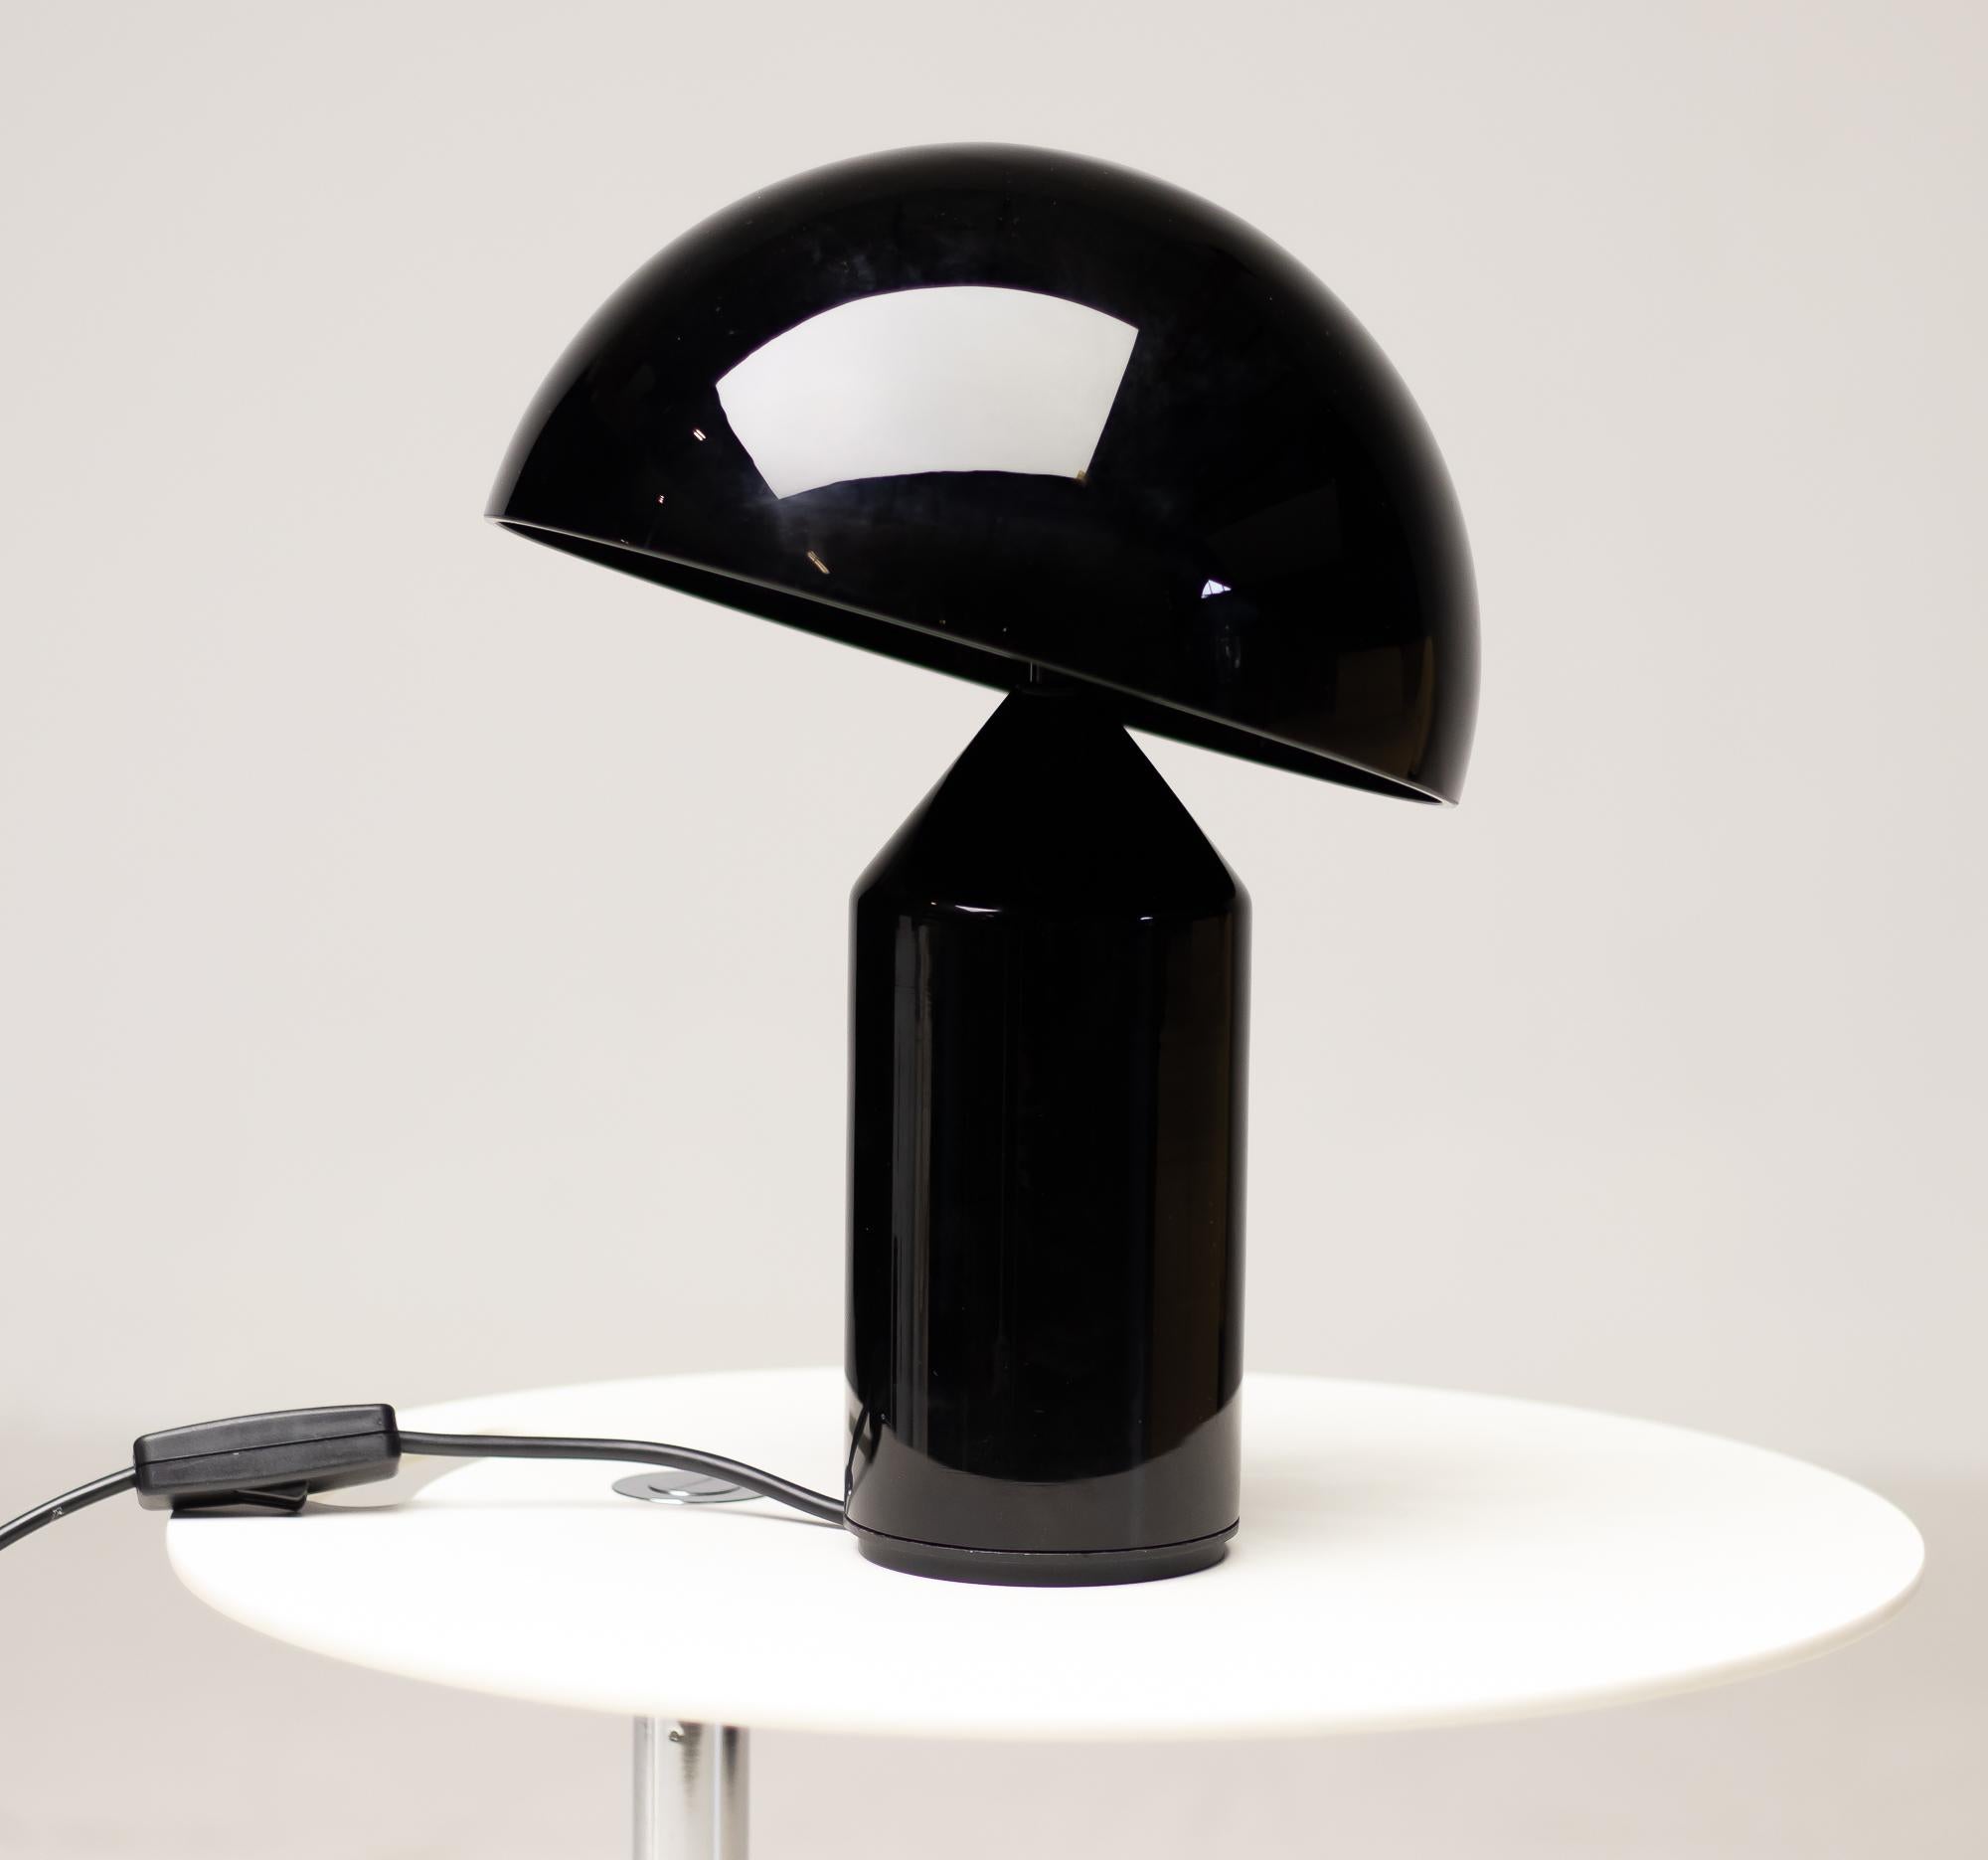 Iconic Atollo model 236 table lamp designed in 1977 by Vico Magistretti for oluce. Over the years, Atollo has become the archetype of the table lamp, winning the Compasso d’Oro in 1979. Provides direct light as a table or bedside lamp. 
Black glass